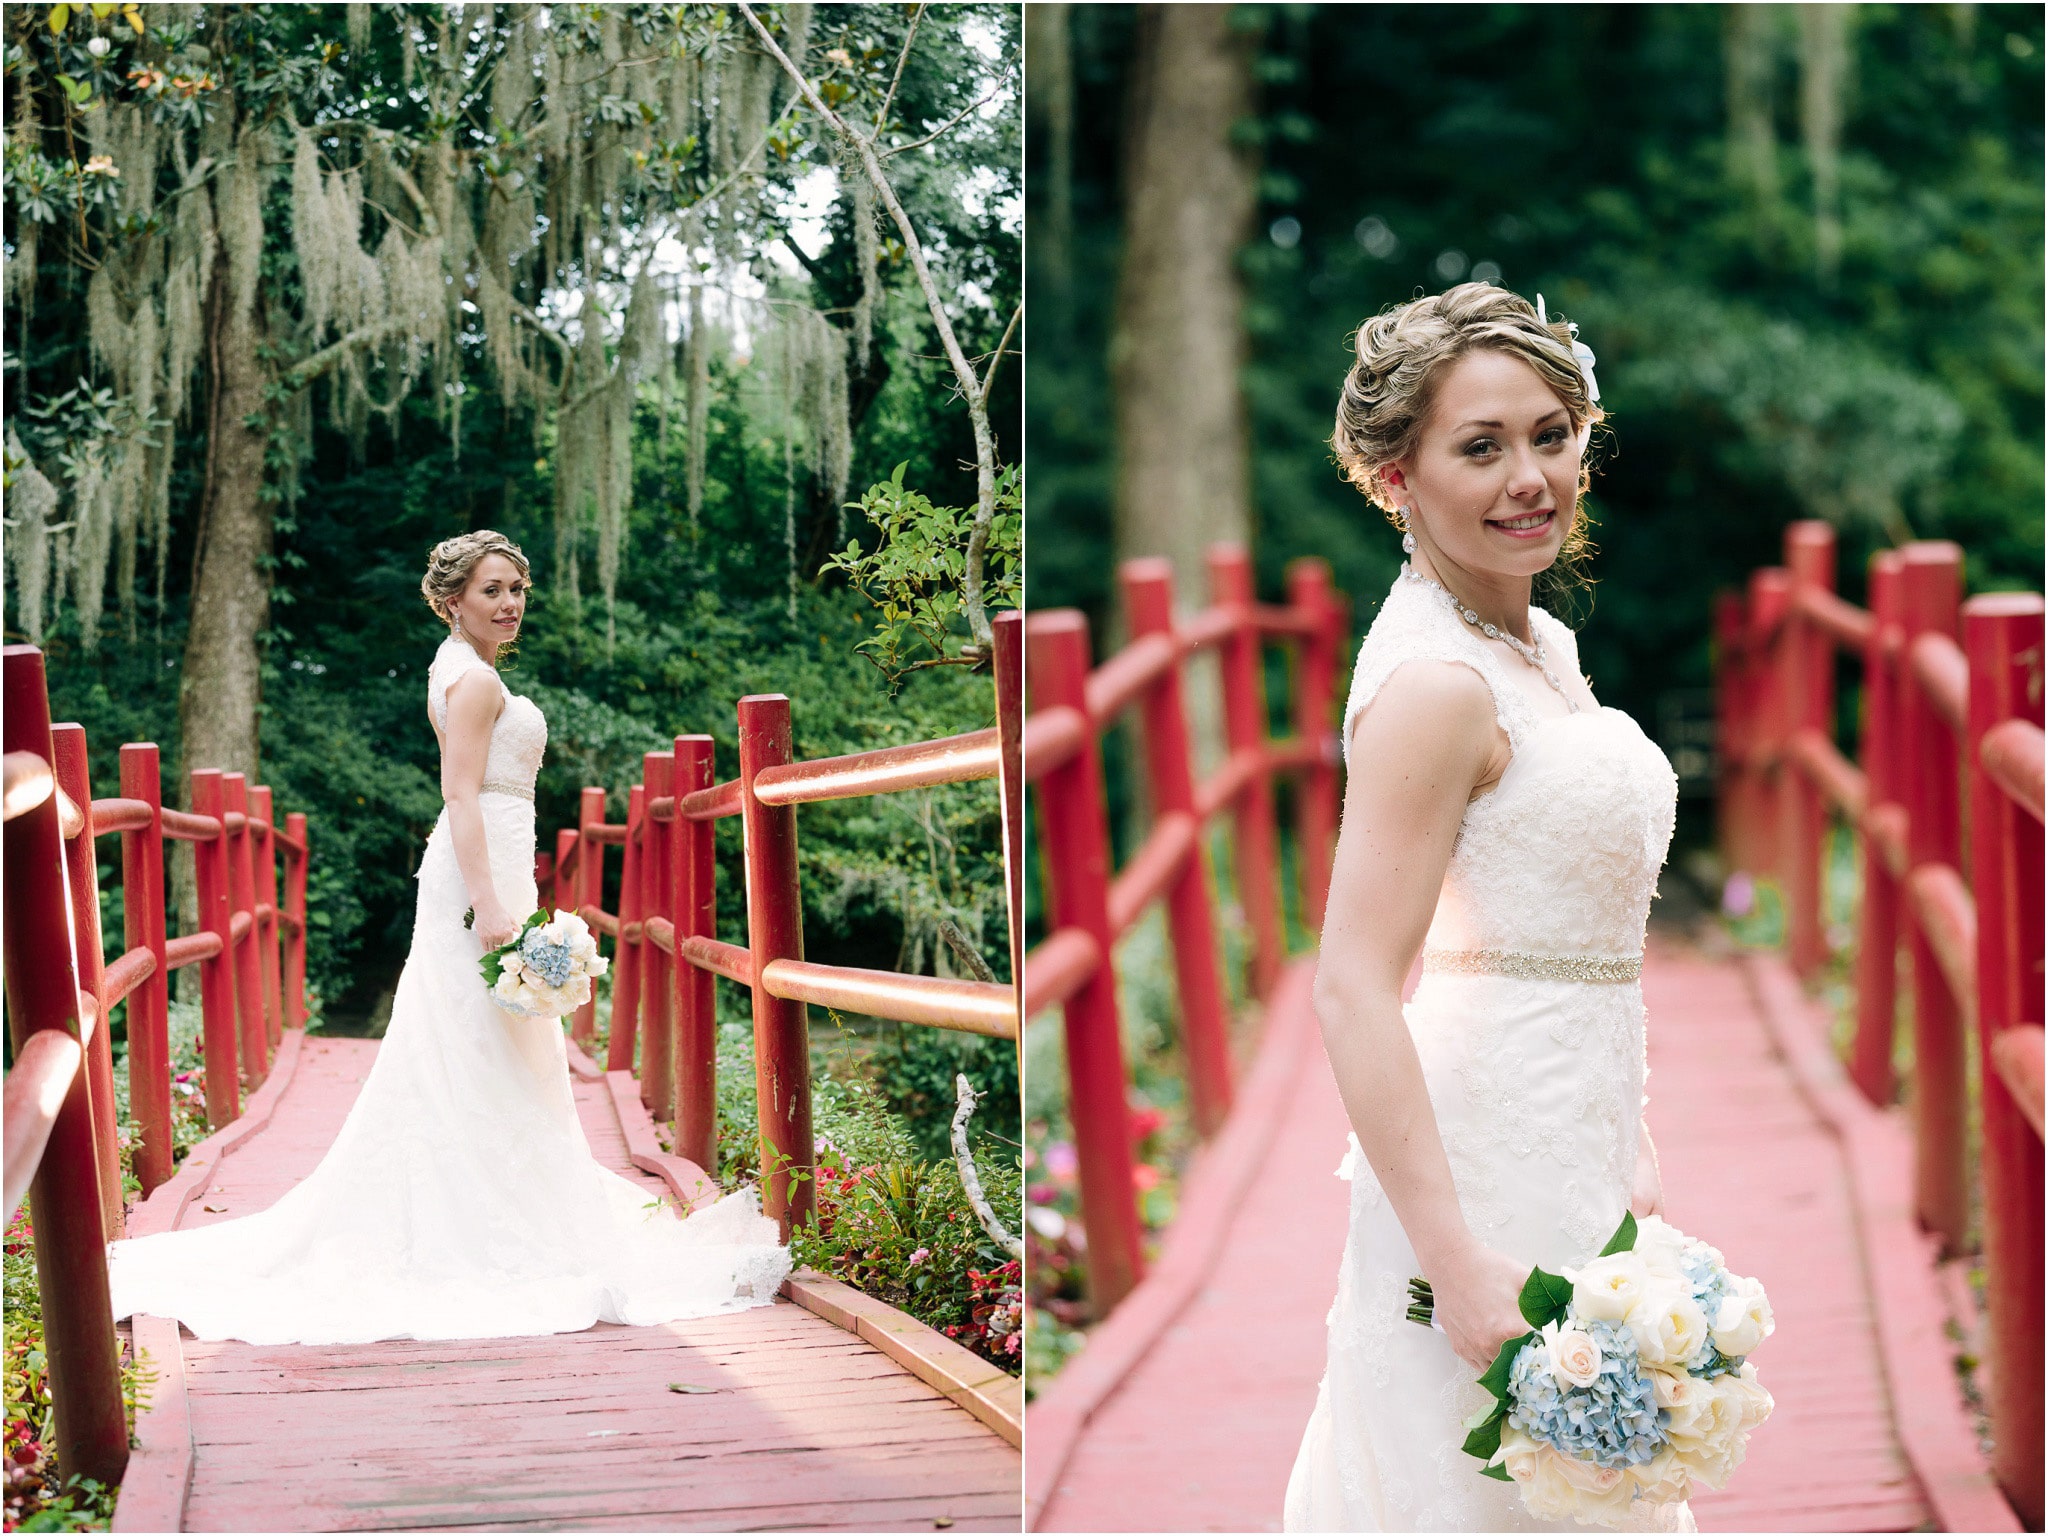 THe bride on a scenic red wooden walkway